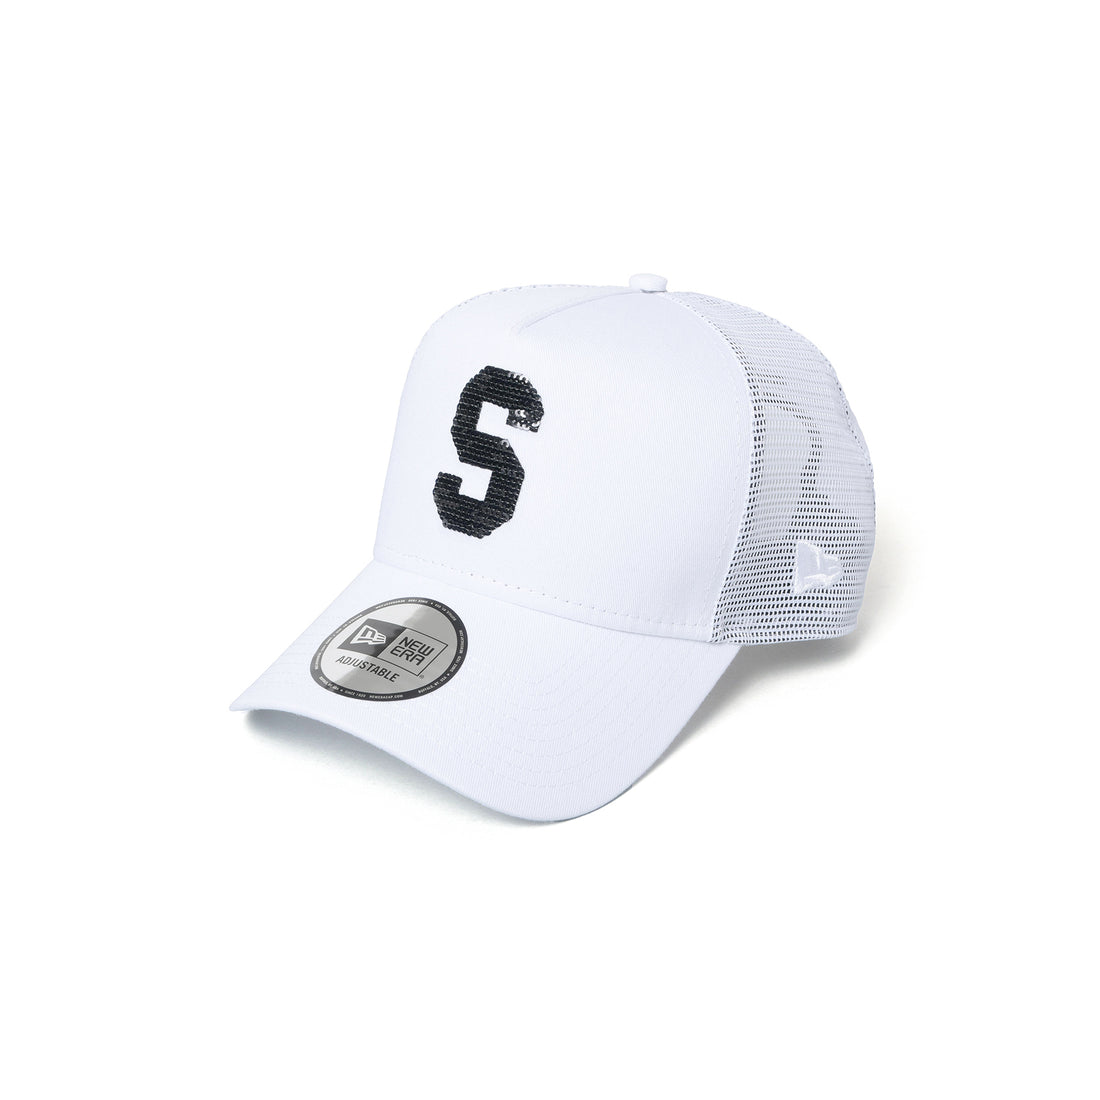 SOPHNET. - NEW ERA 9FORTY A-FRAME S. MESH CAP  HBX - Globally Curated  Fashion and Lifestyle by Hypebeast